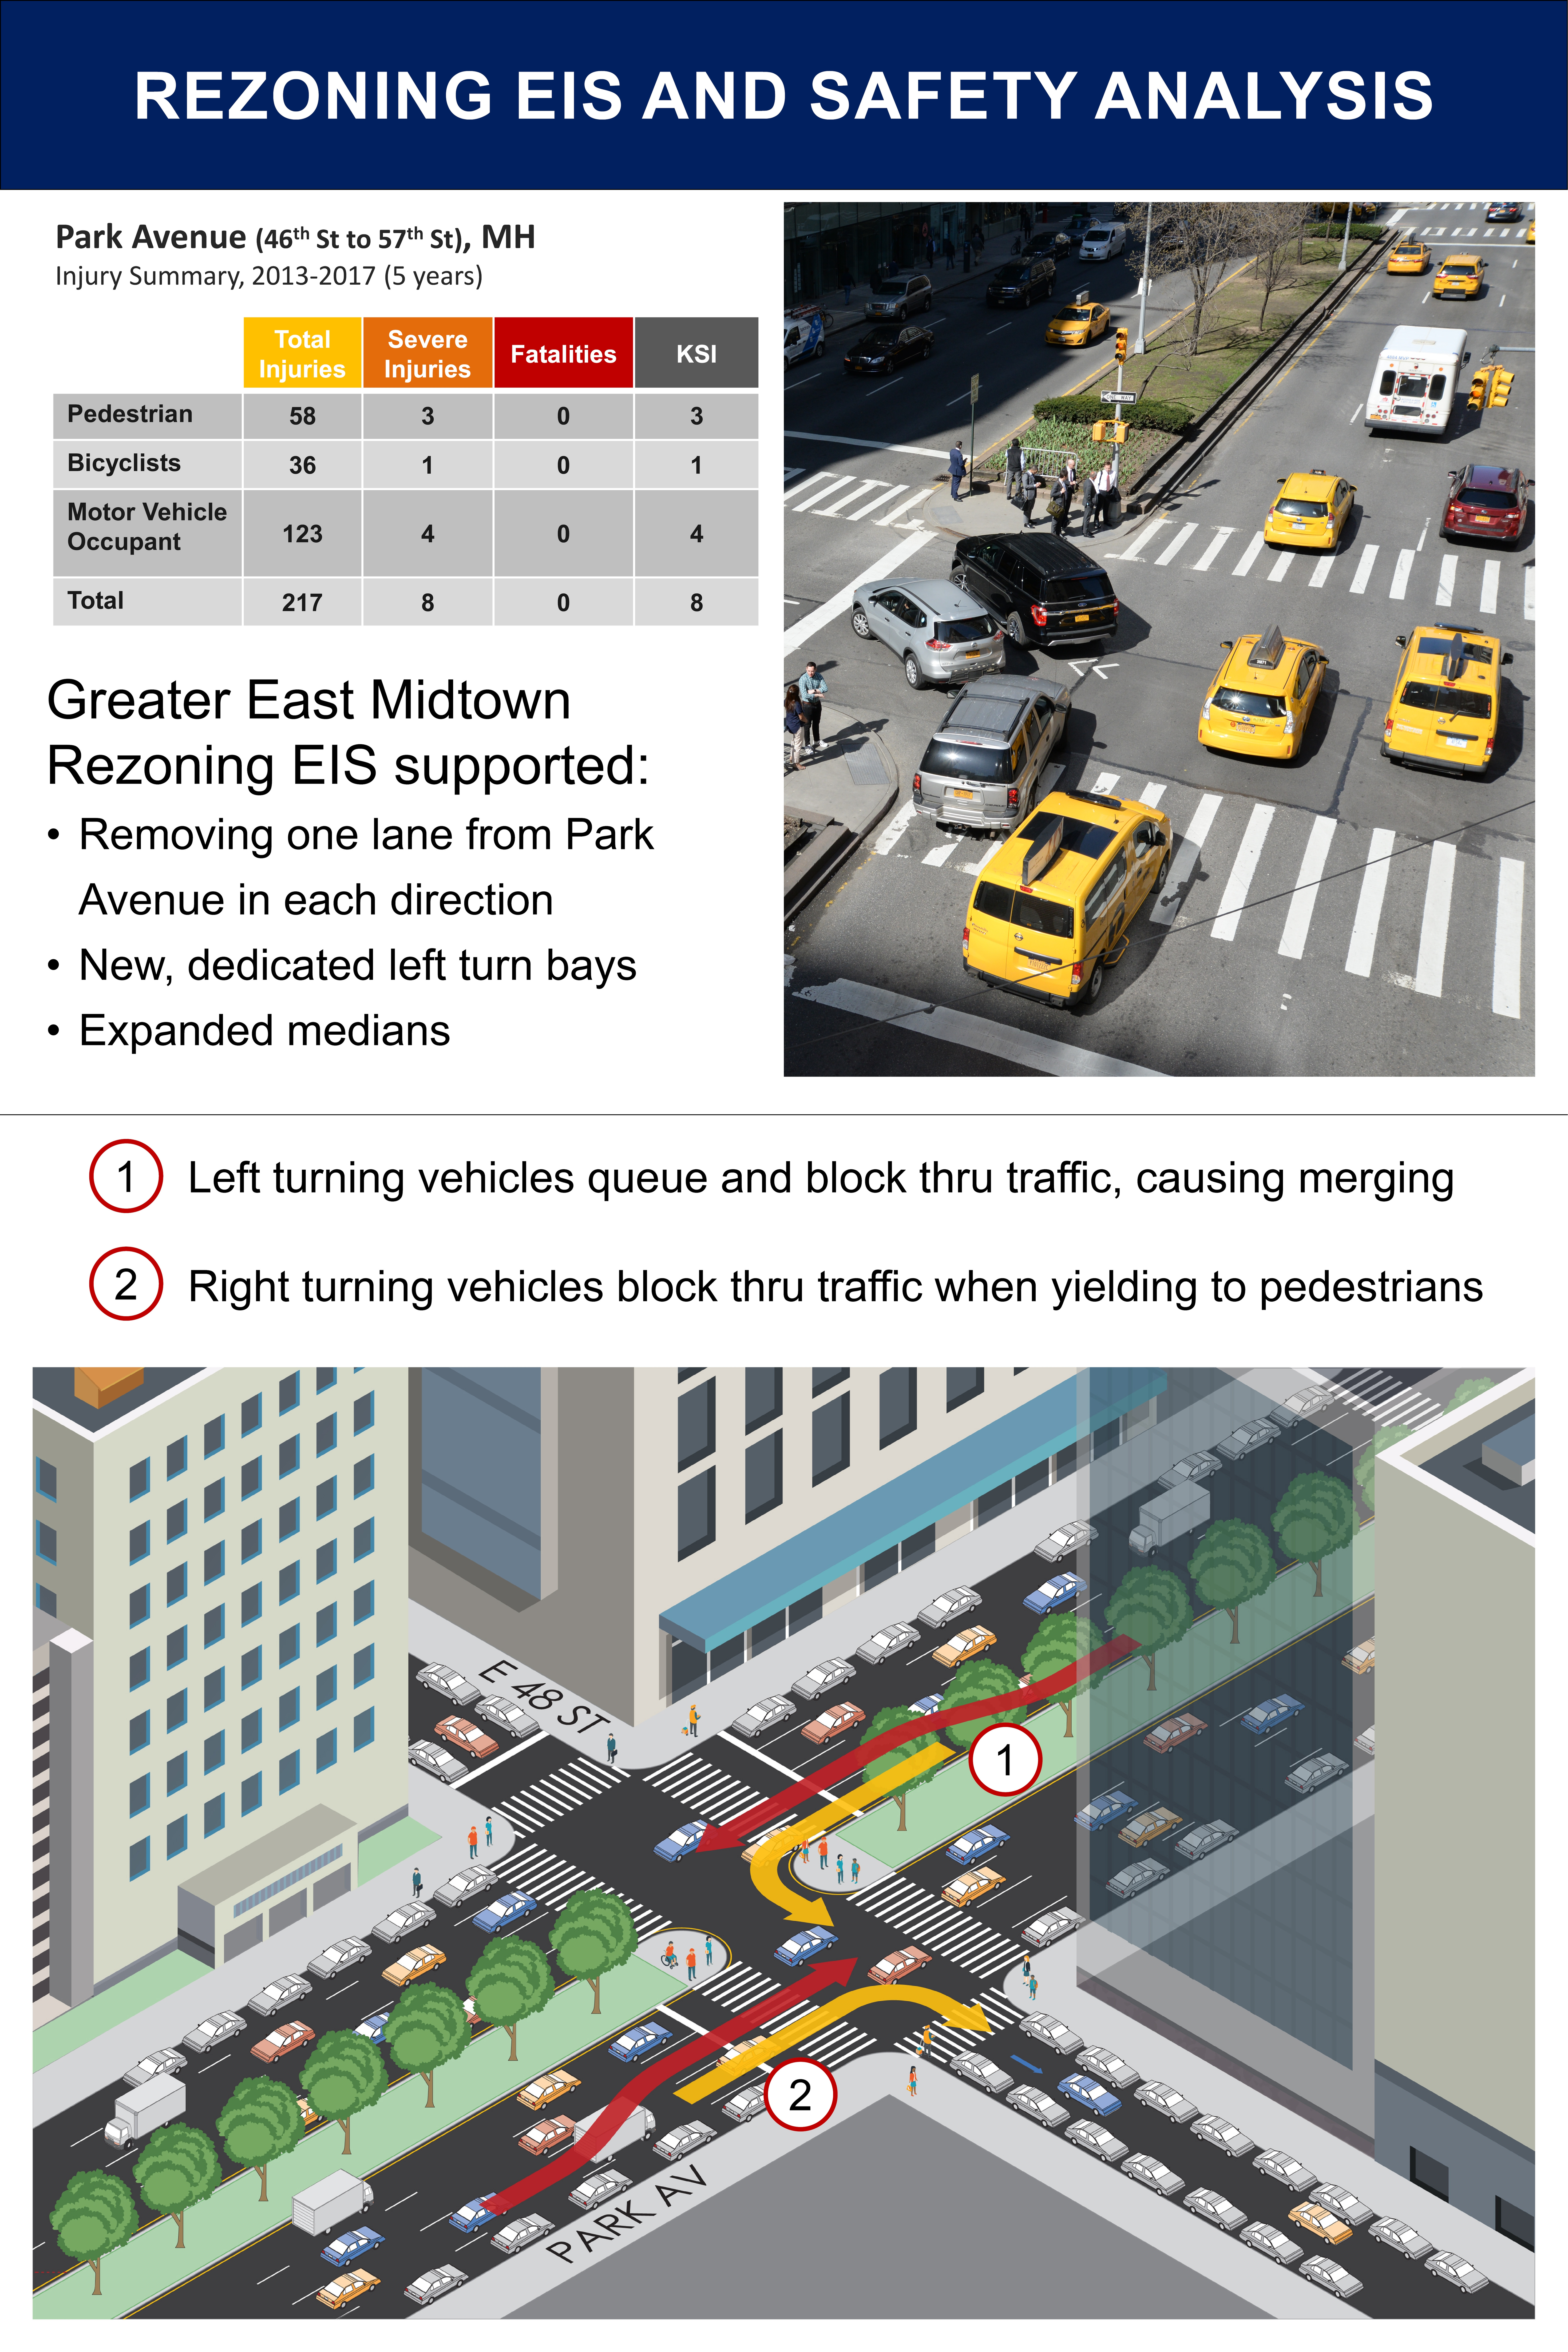 A diagram showing safety data and vehicular movements